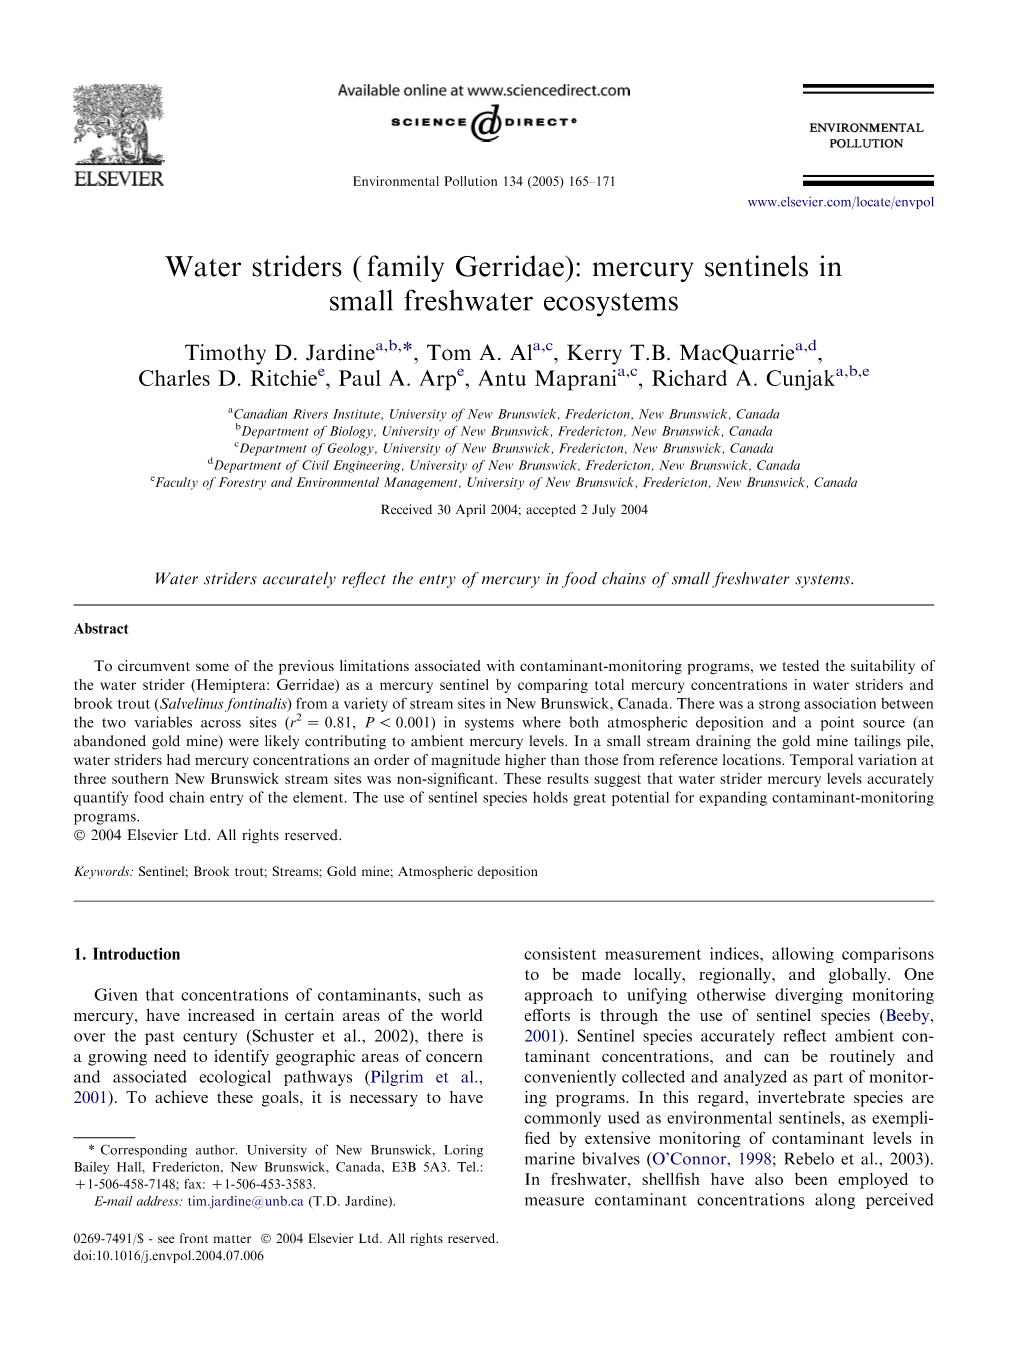 Water Striders ( Family Gerridae): Mercury Sentinels in Small Freshwater Ecosystems